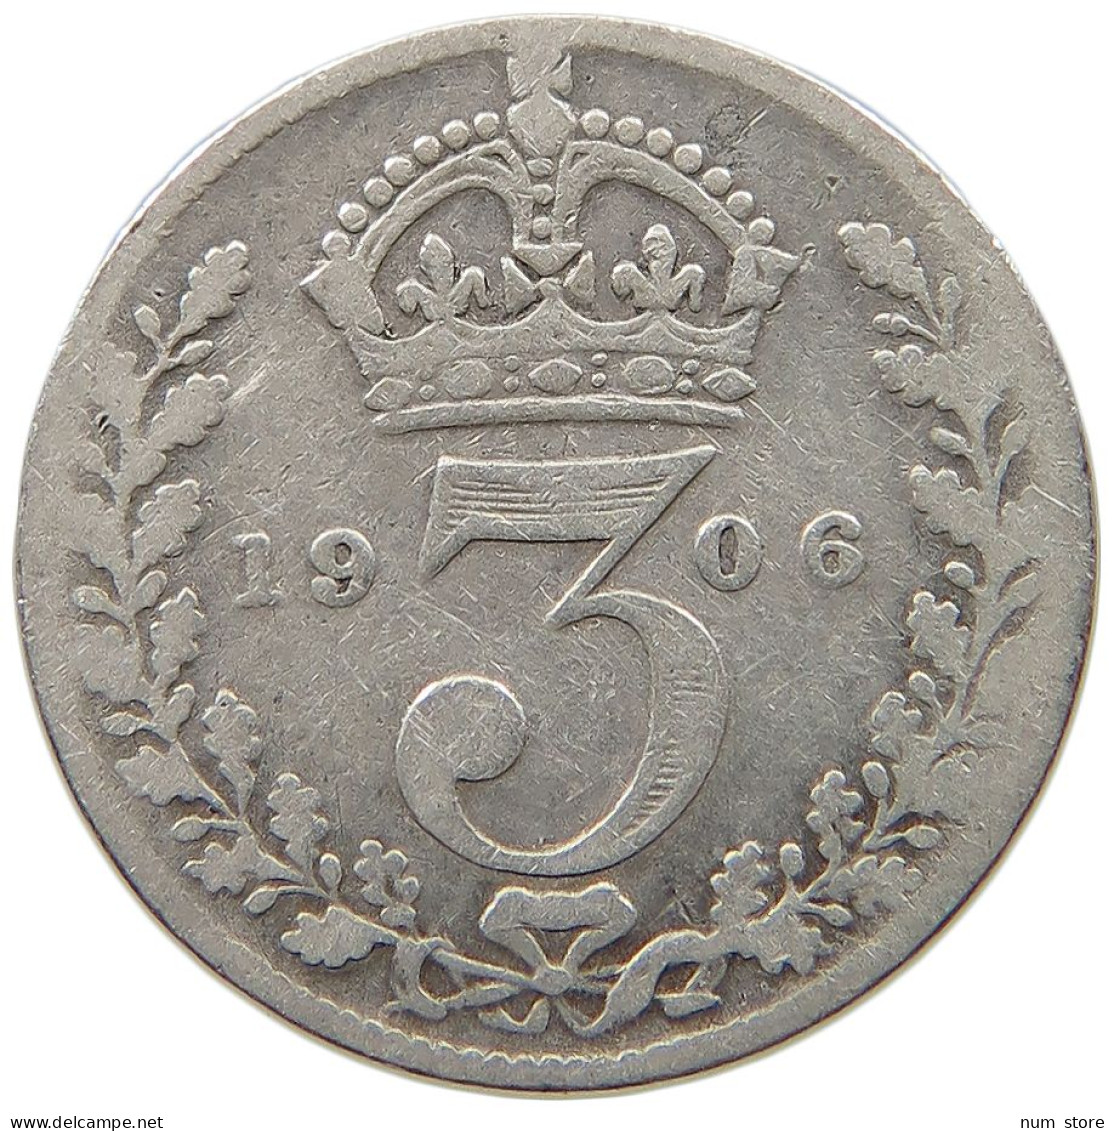 GREAT BRITAIN THREEPENCE 1906 Edward VII., 1901 - 1910 #a033 0177 - F. 3 Pence